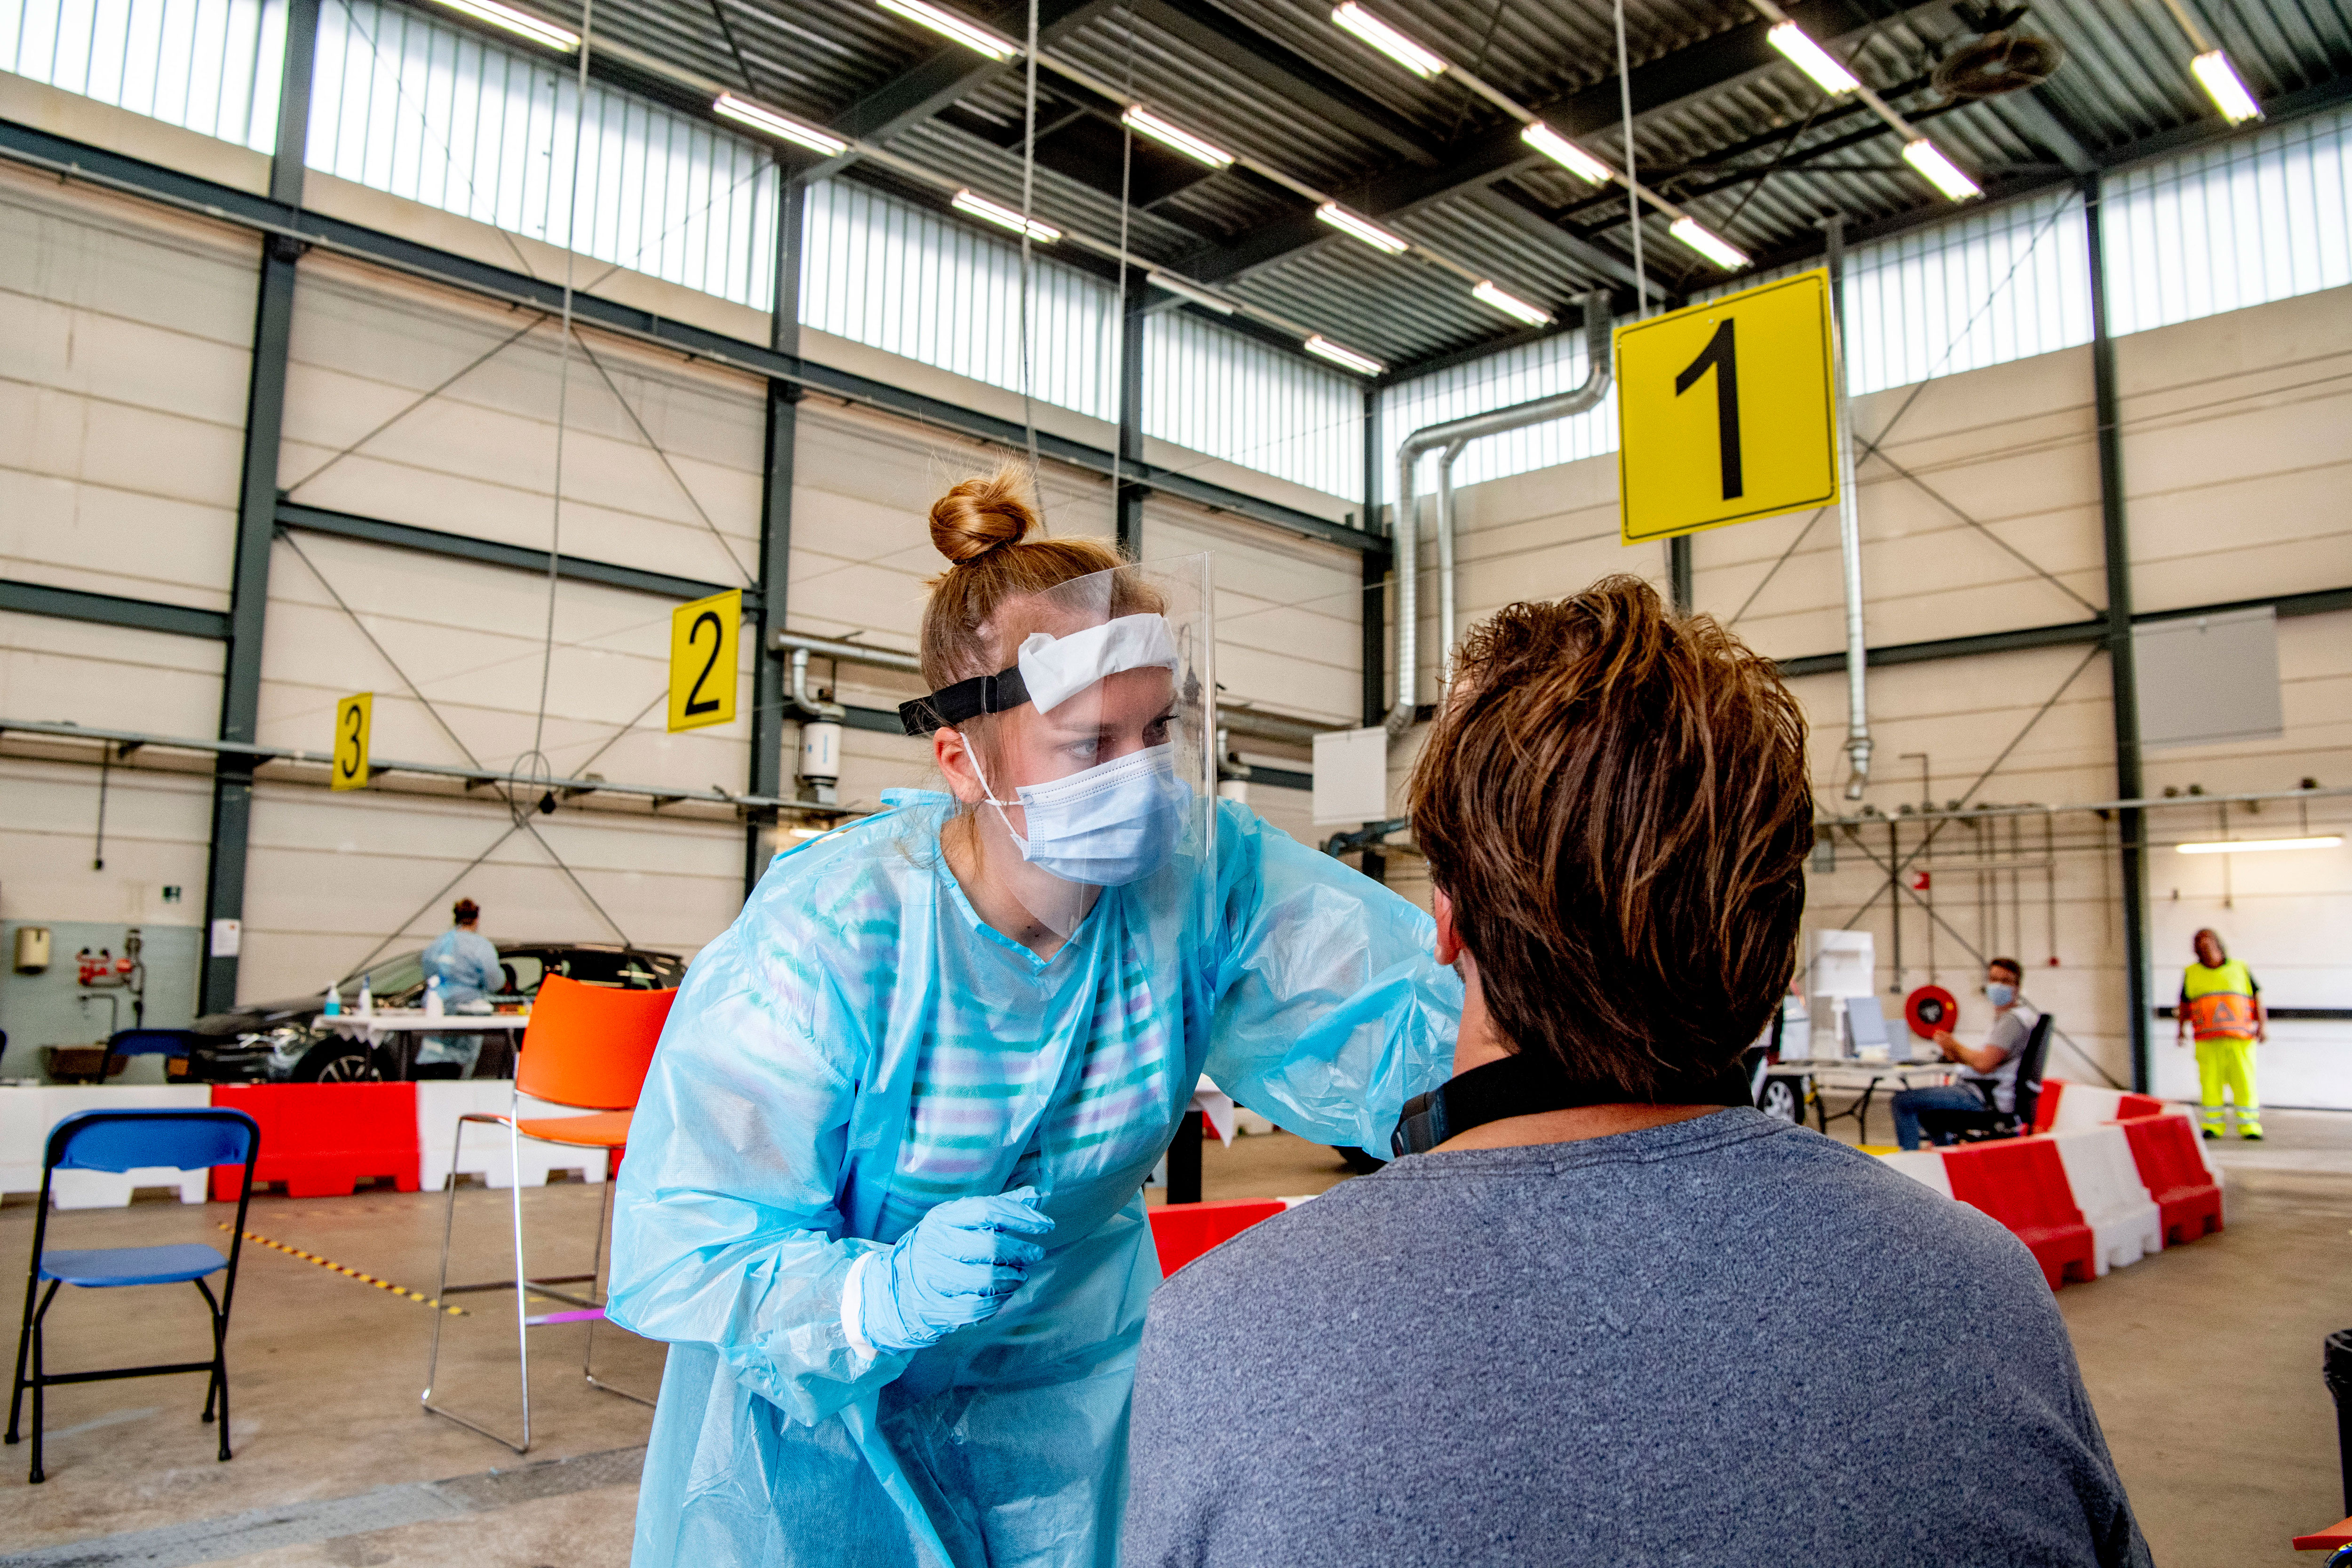 A health worker in Utrecht, Netherlands, tests someone for Covid-19 on August 31.